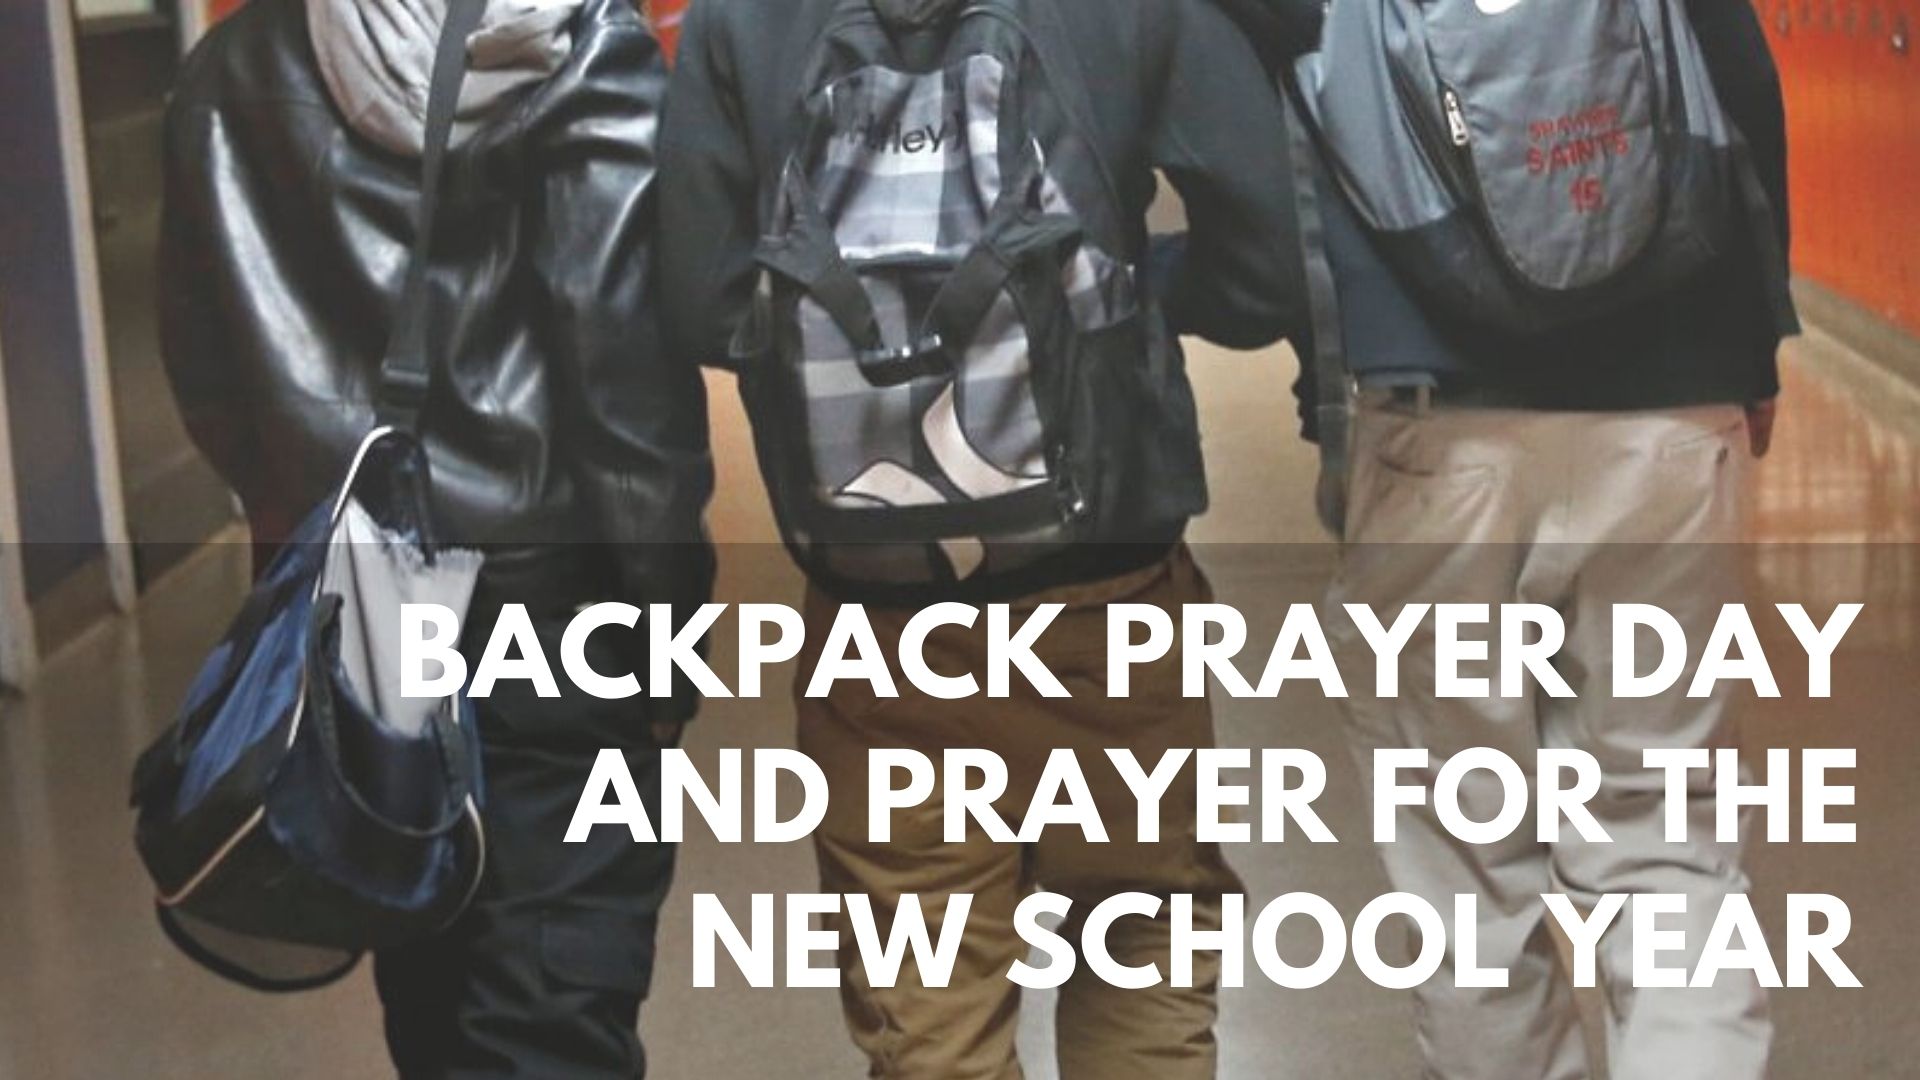 Image of kids carrying backpacks at The Station Church in Hoover, Alabama